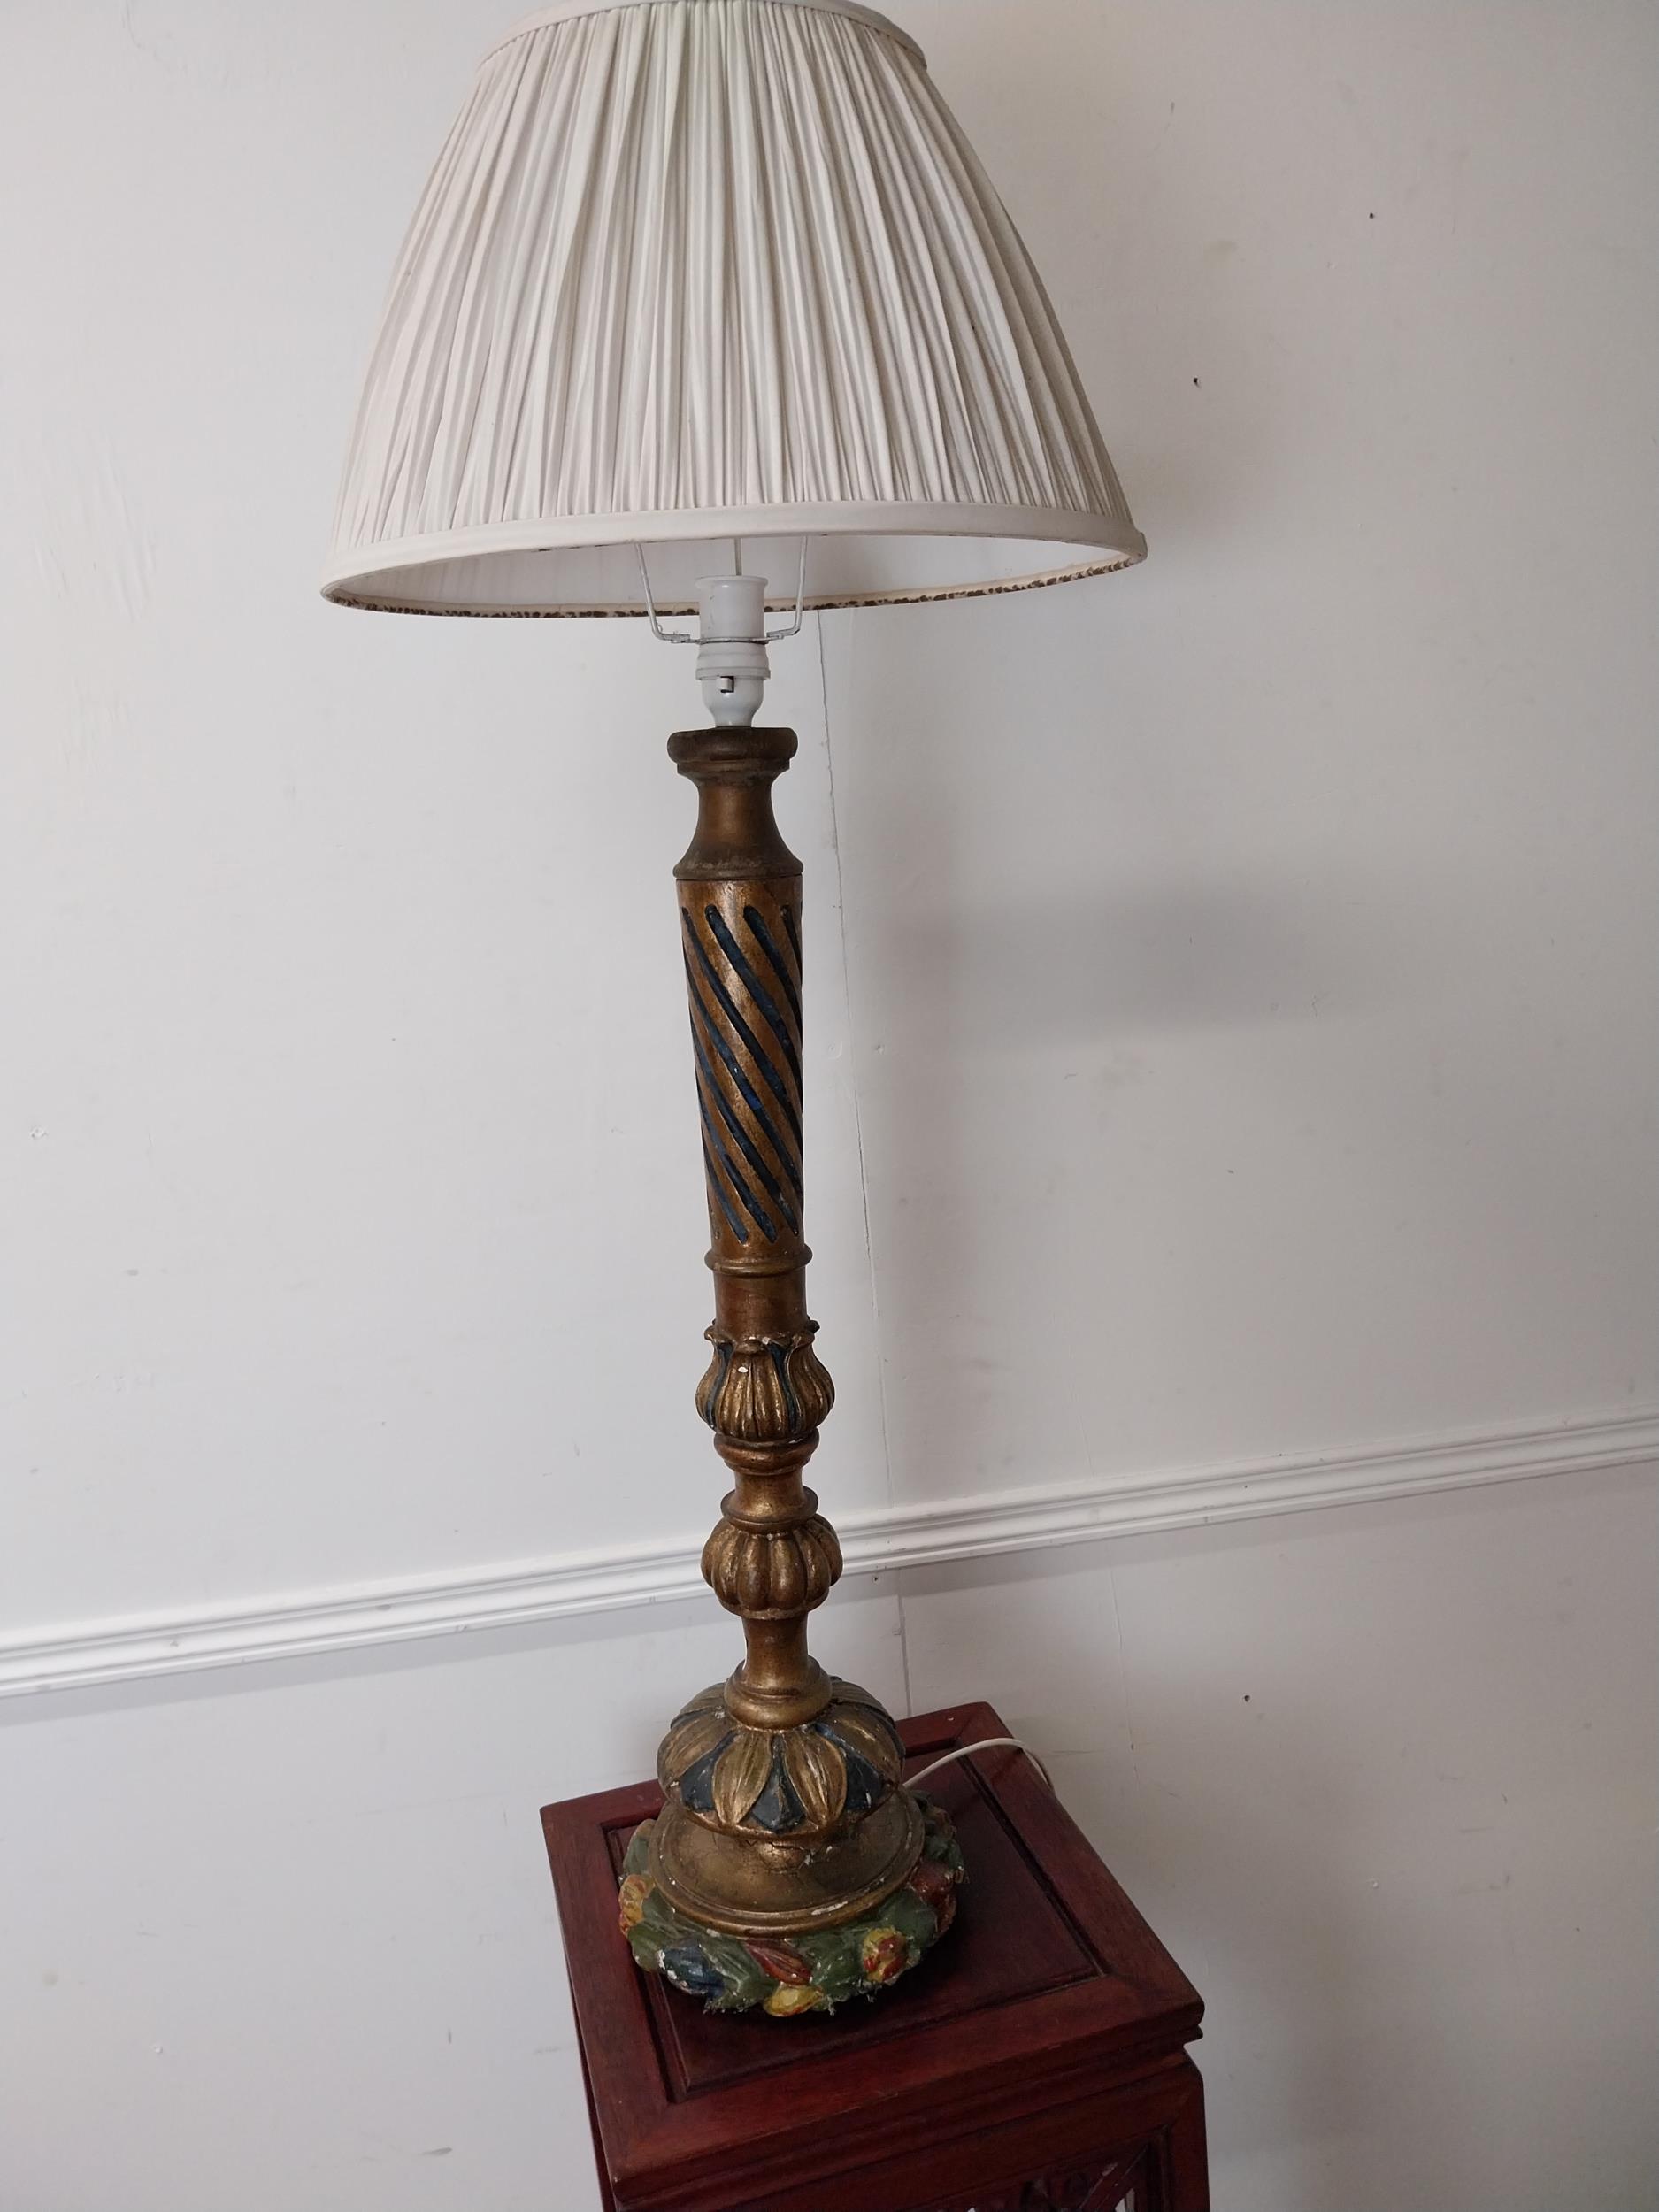 Italian gilt and painted pine table lamp with cloth shade {102 cm H x 40 cm Dia.}.